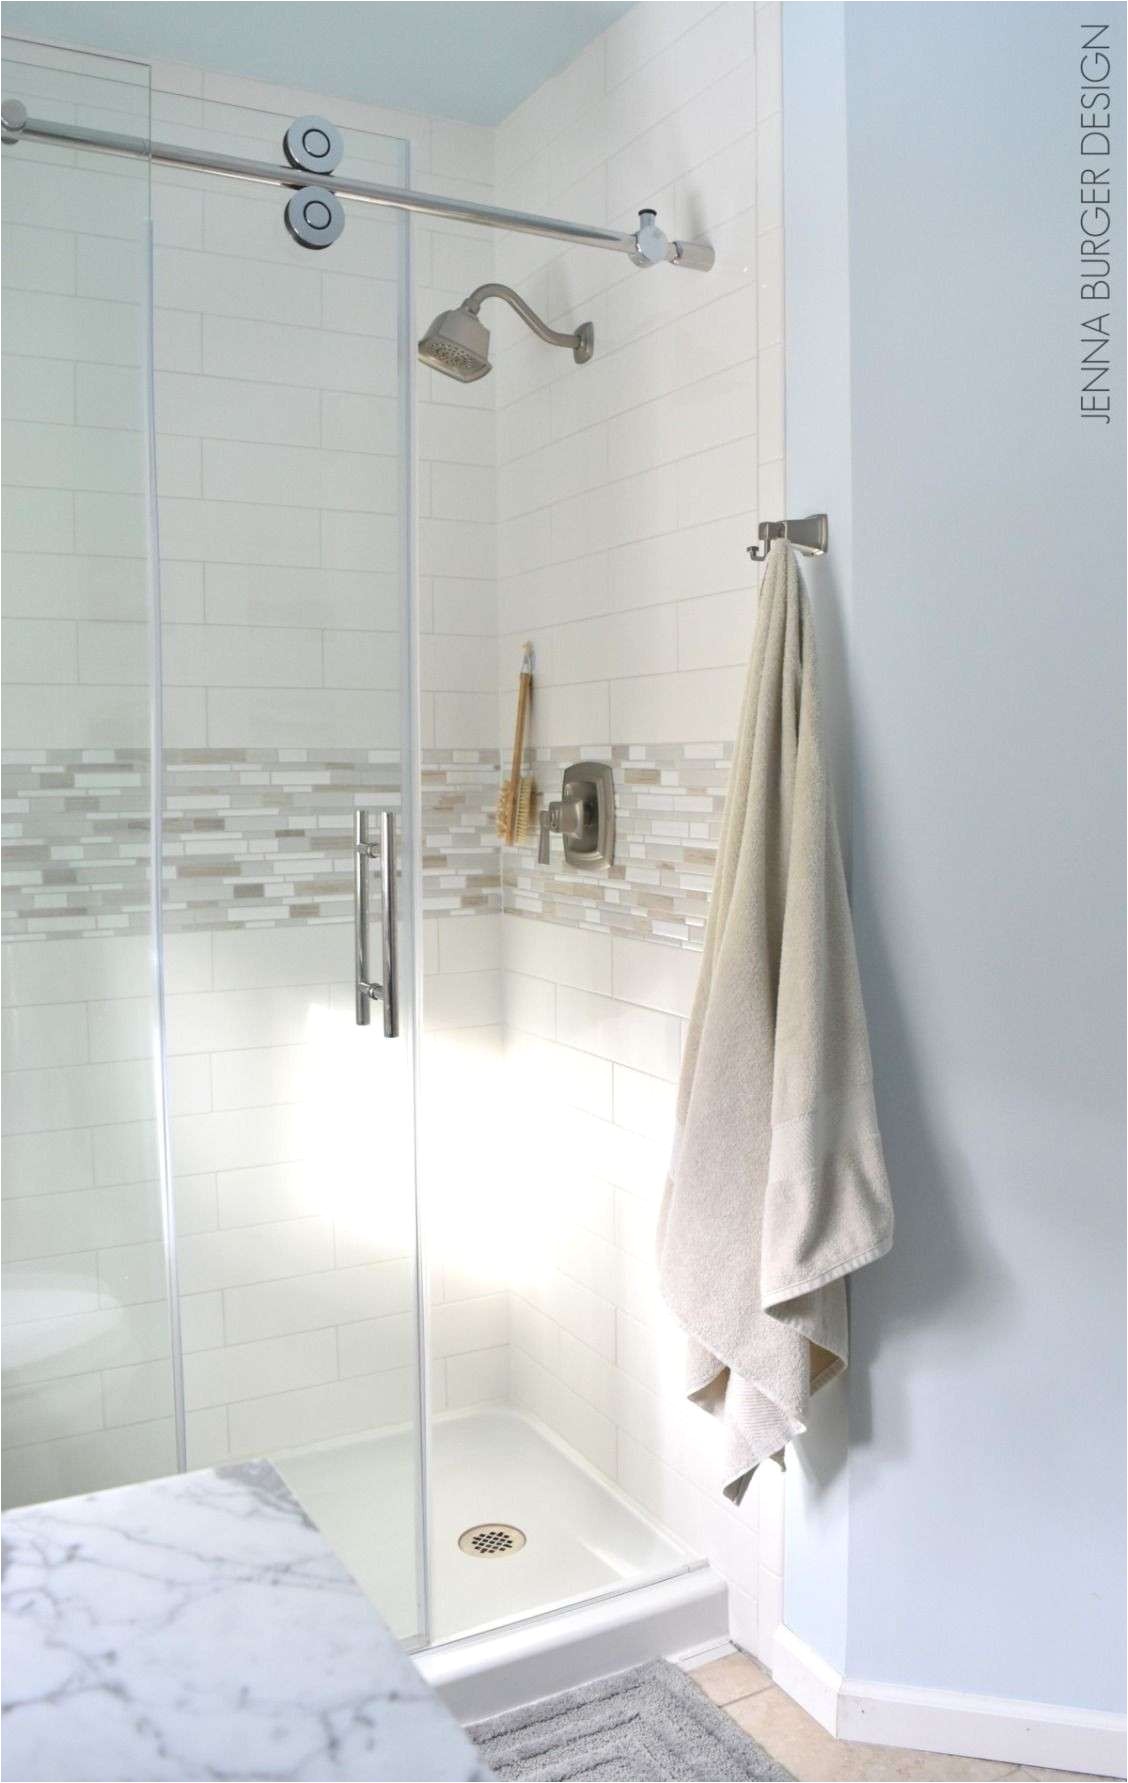 american shower door lovely 30 the best showers for small spaces ideas onionskeen